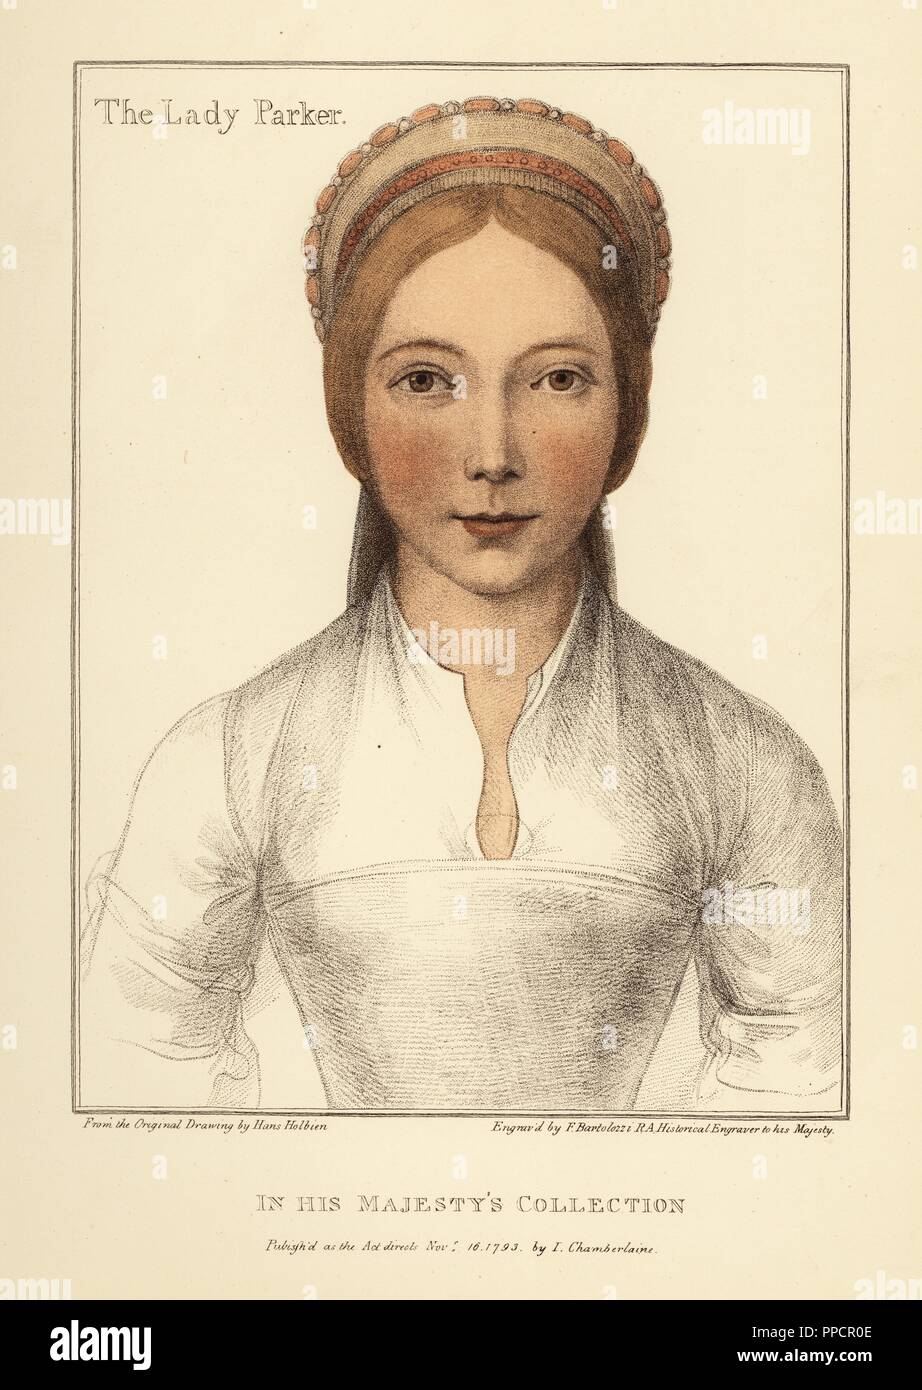 Elizabeth Calthorpe, Lady Parker, wife of Sir Henry Parker. Also identified as Lady Grace Parker and Jane Parker, sister-in-law to Anne Boleyn. Handcoloured copperplate engraving by Francis Bartolozzi after Hans Holbein from Facsimiles of Original Drawings by Hans Holbein, Hamilton, Adams, London, 1884. Stock Photo